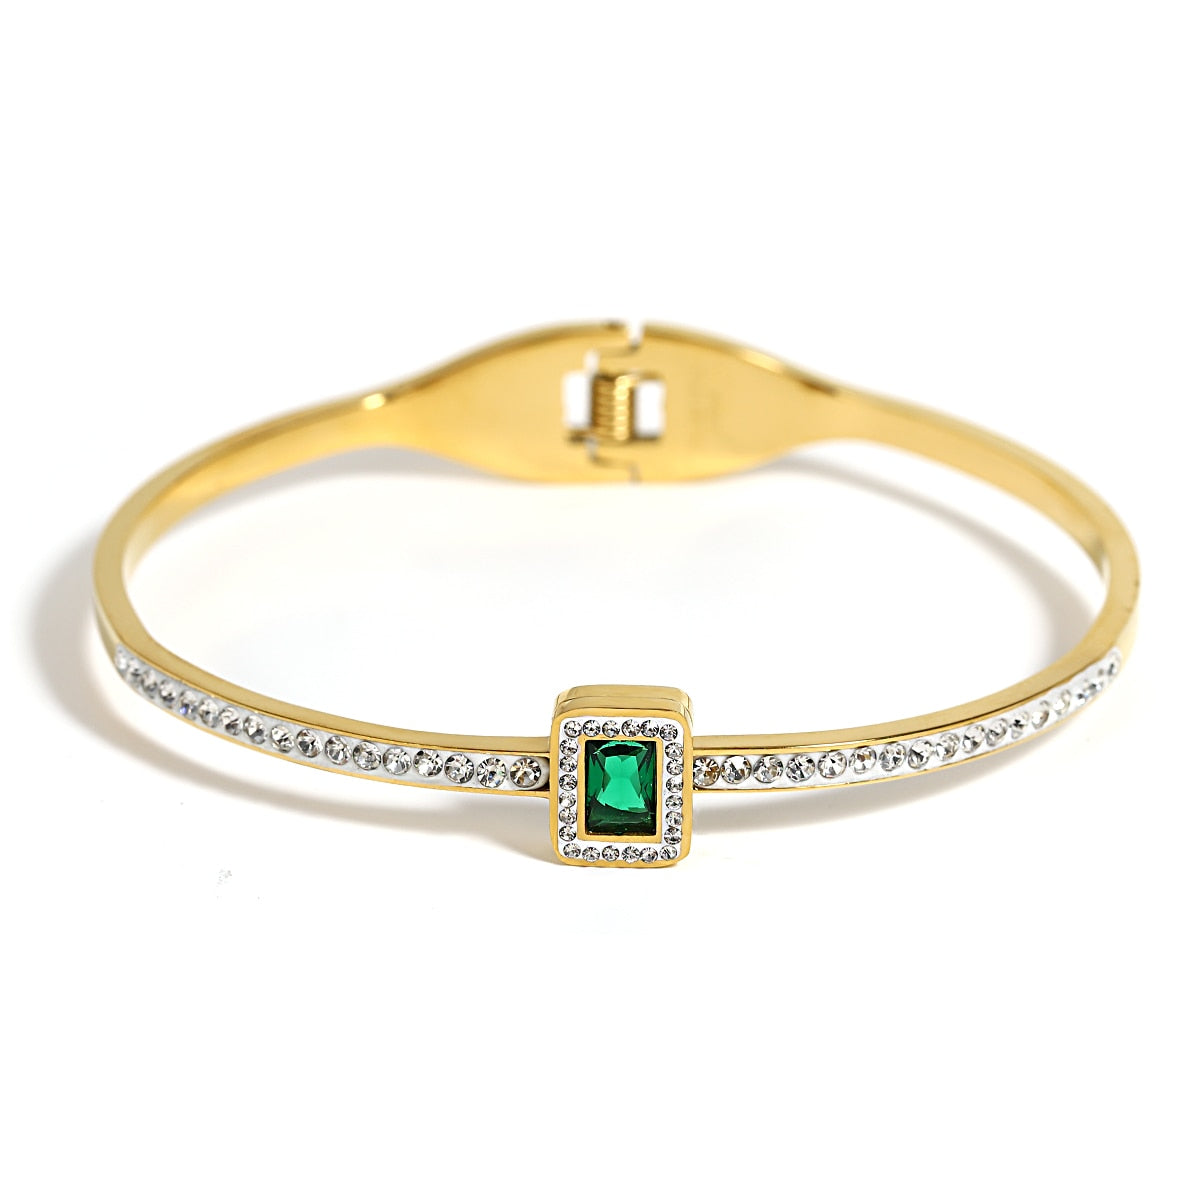 Chic Gold-Plated Stainless Steel Bangle Bracelet